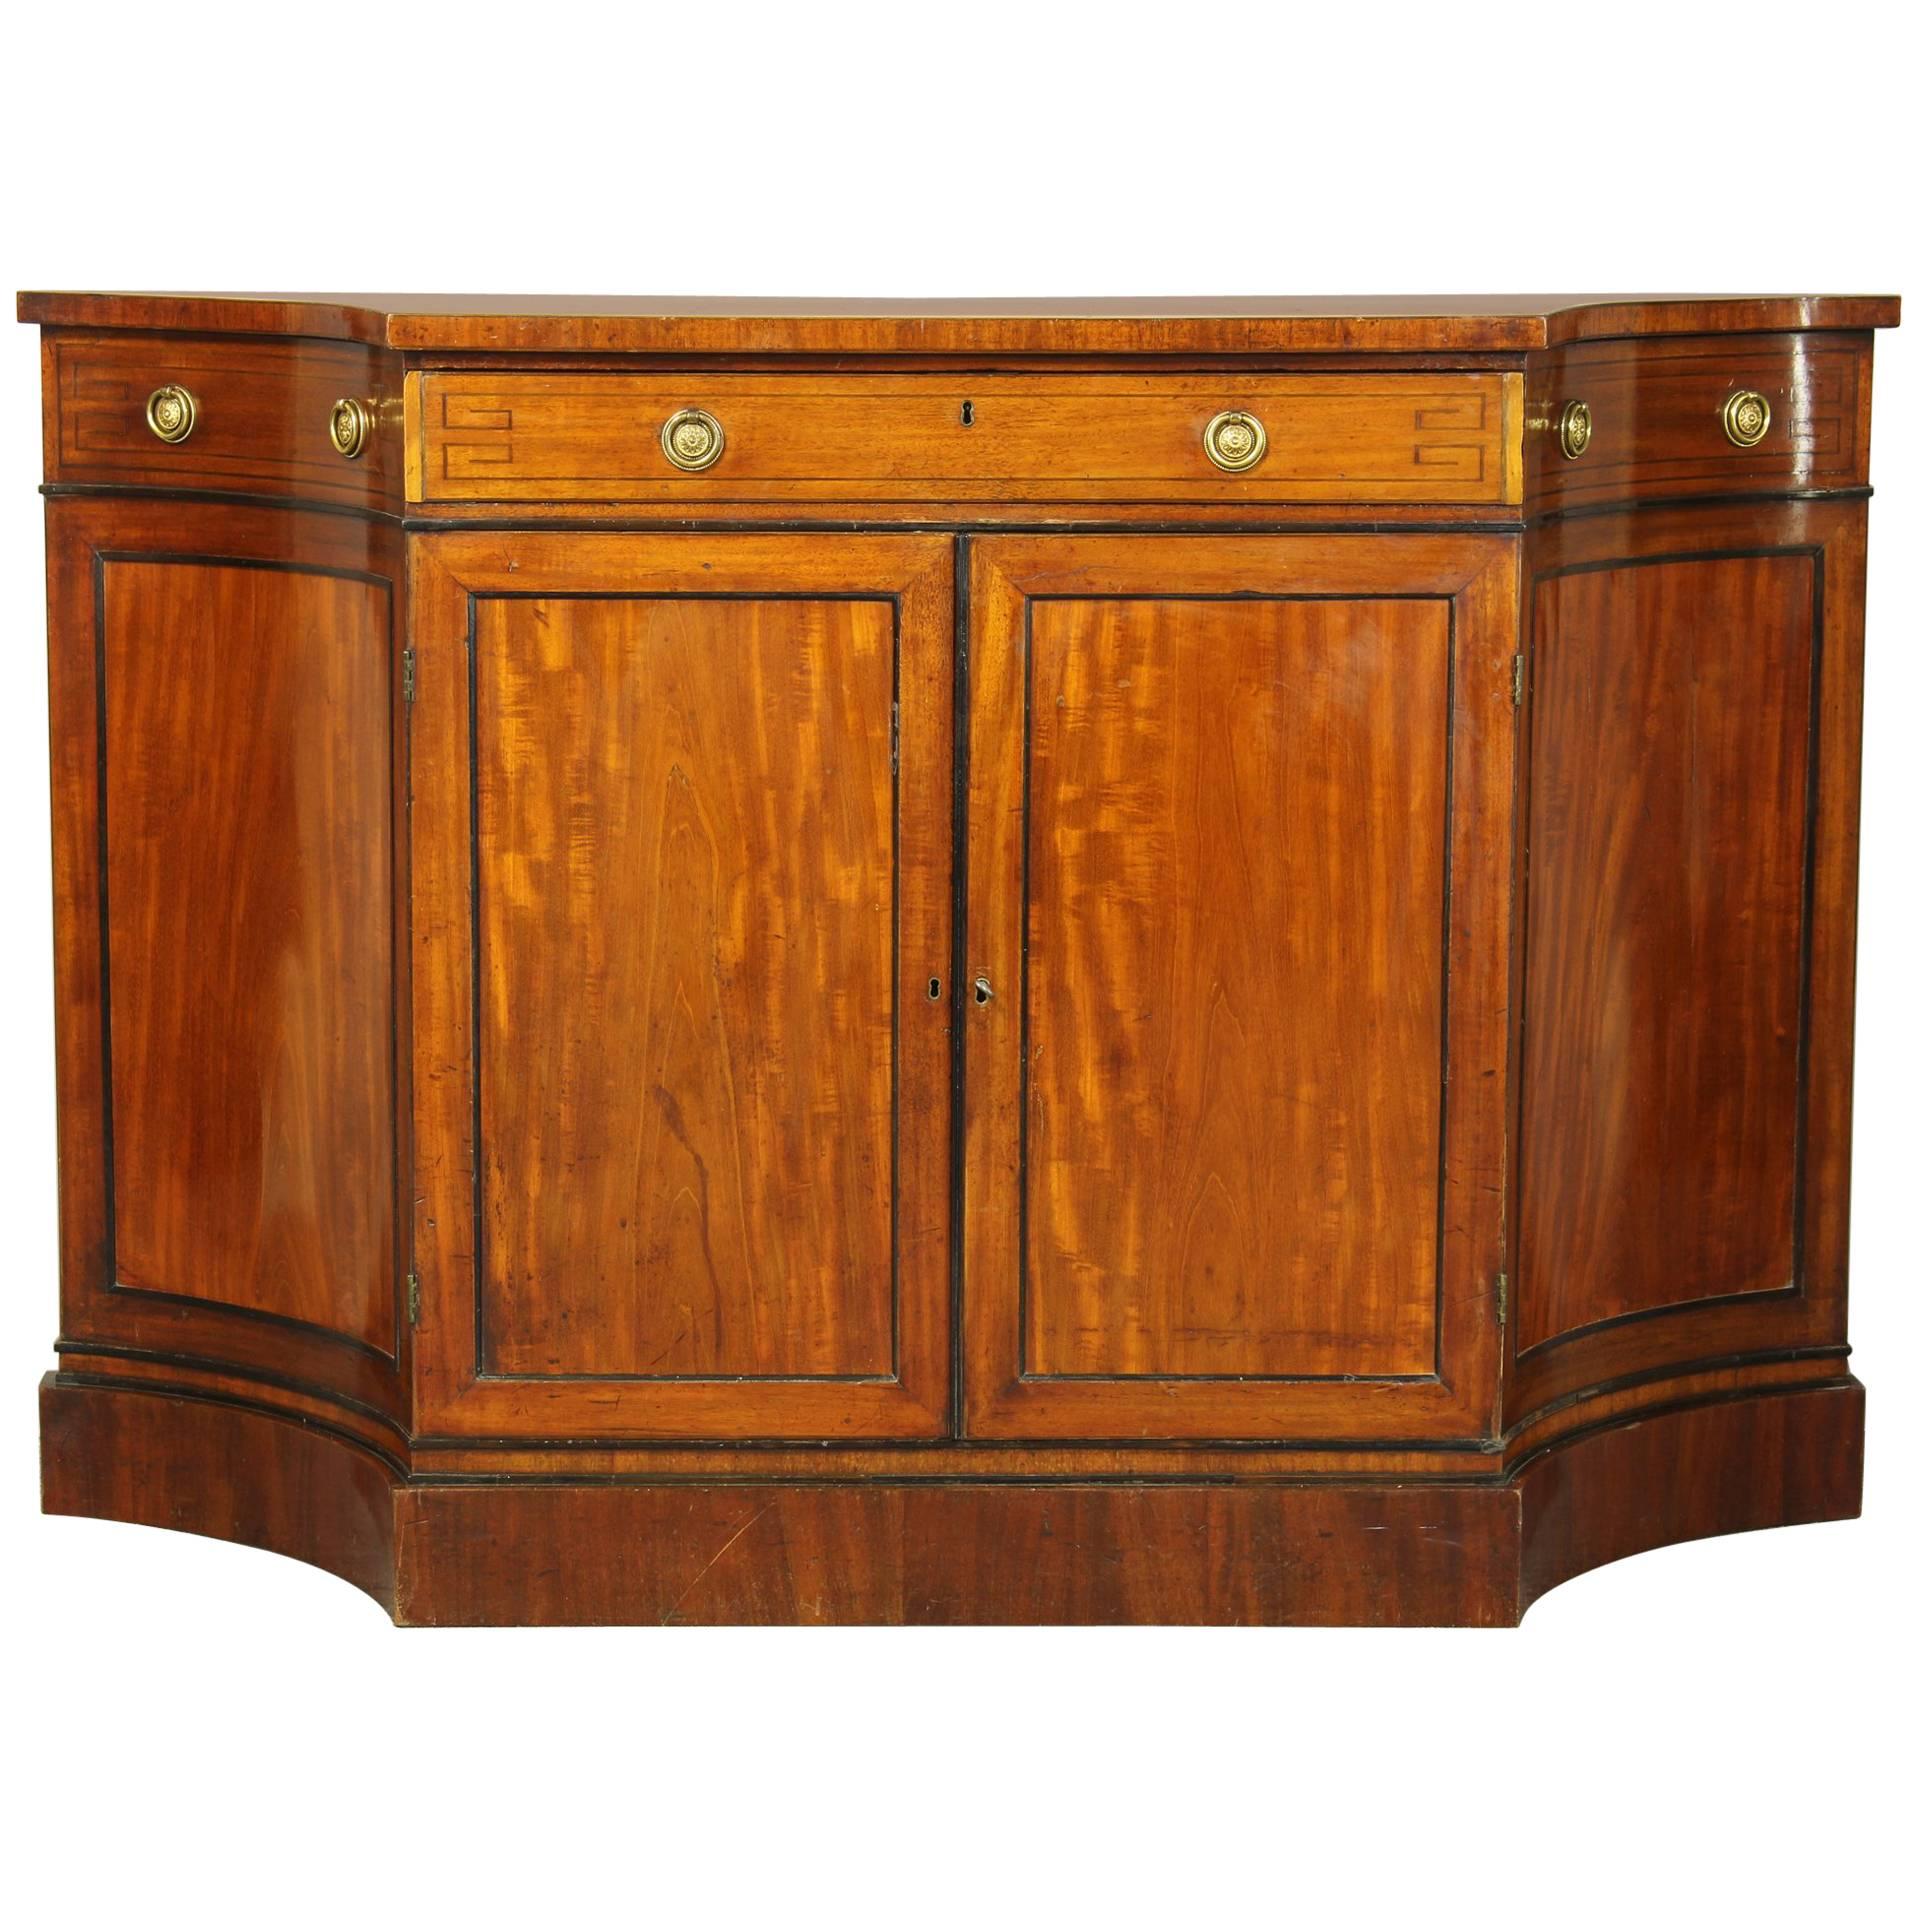 Early 19th Century Regency Credenza For Sale